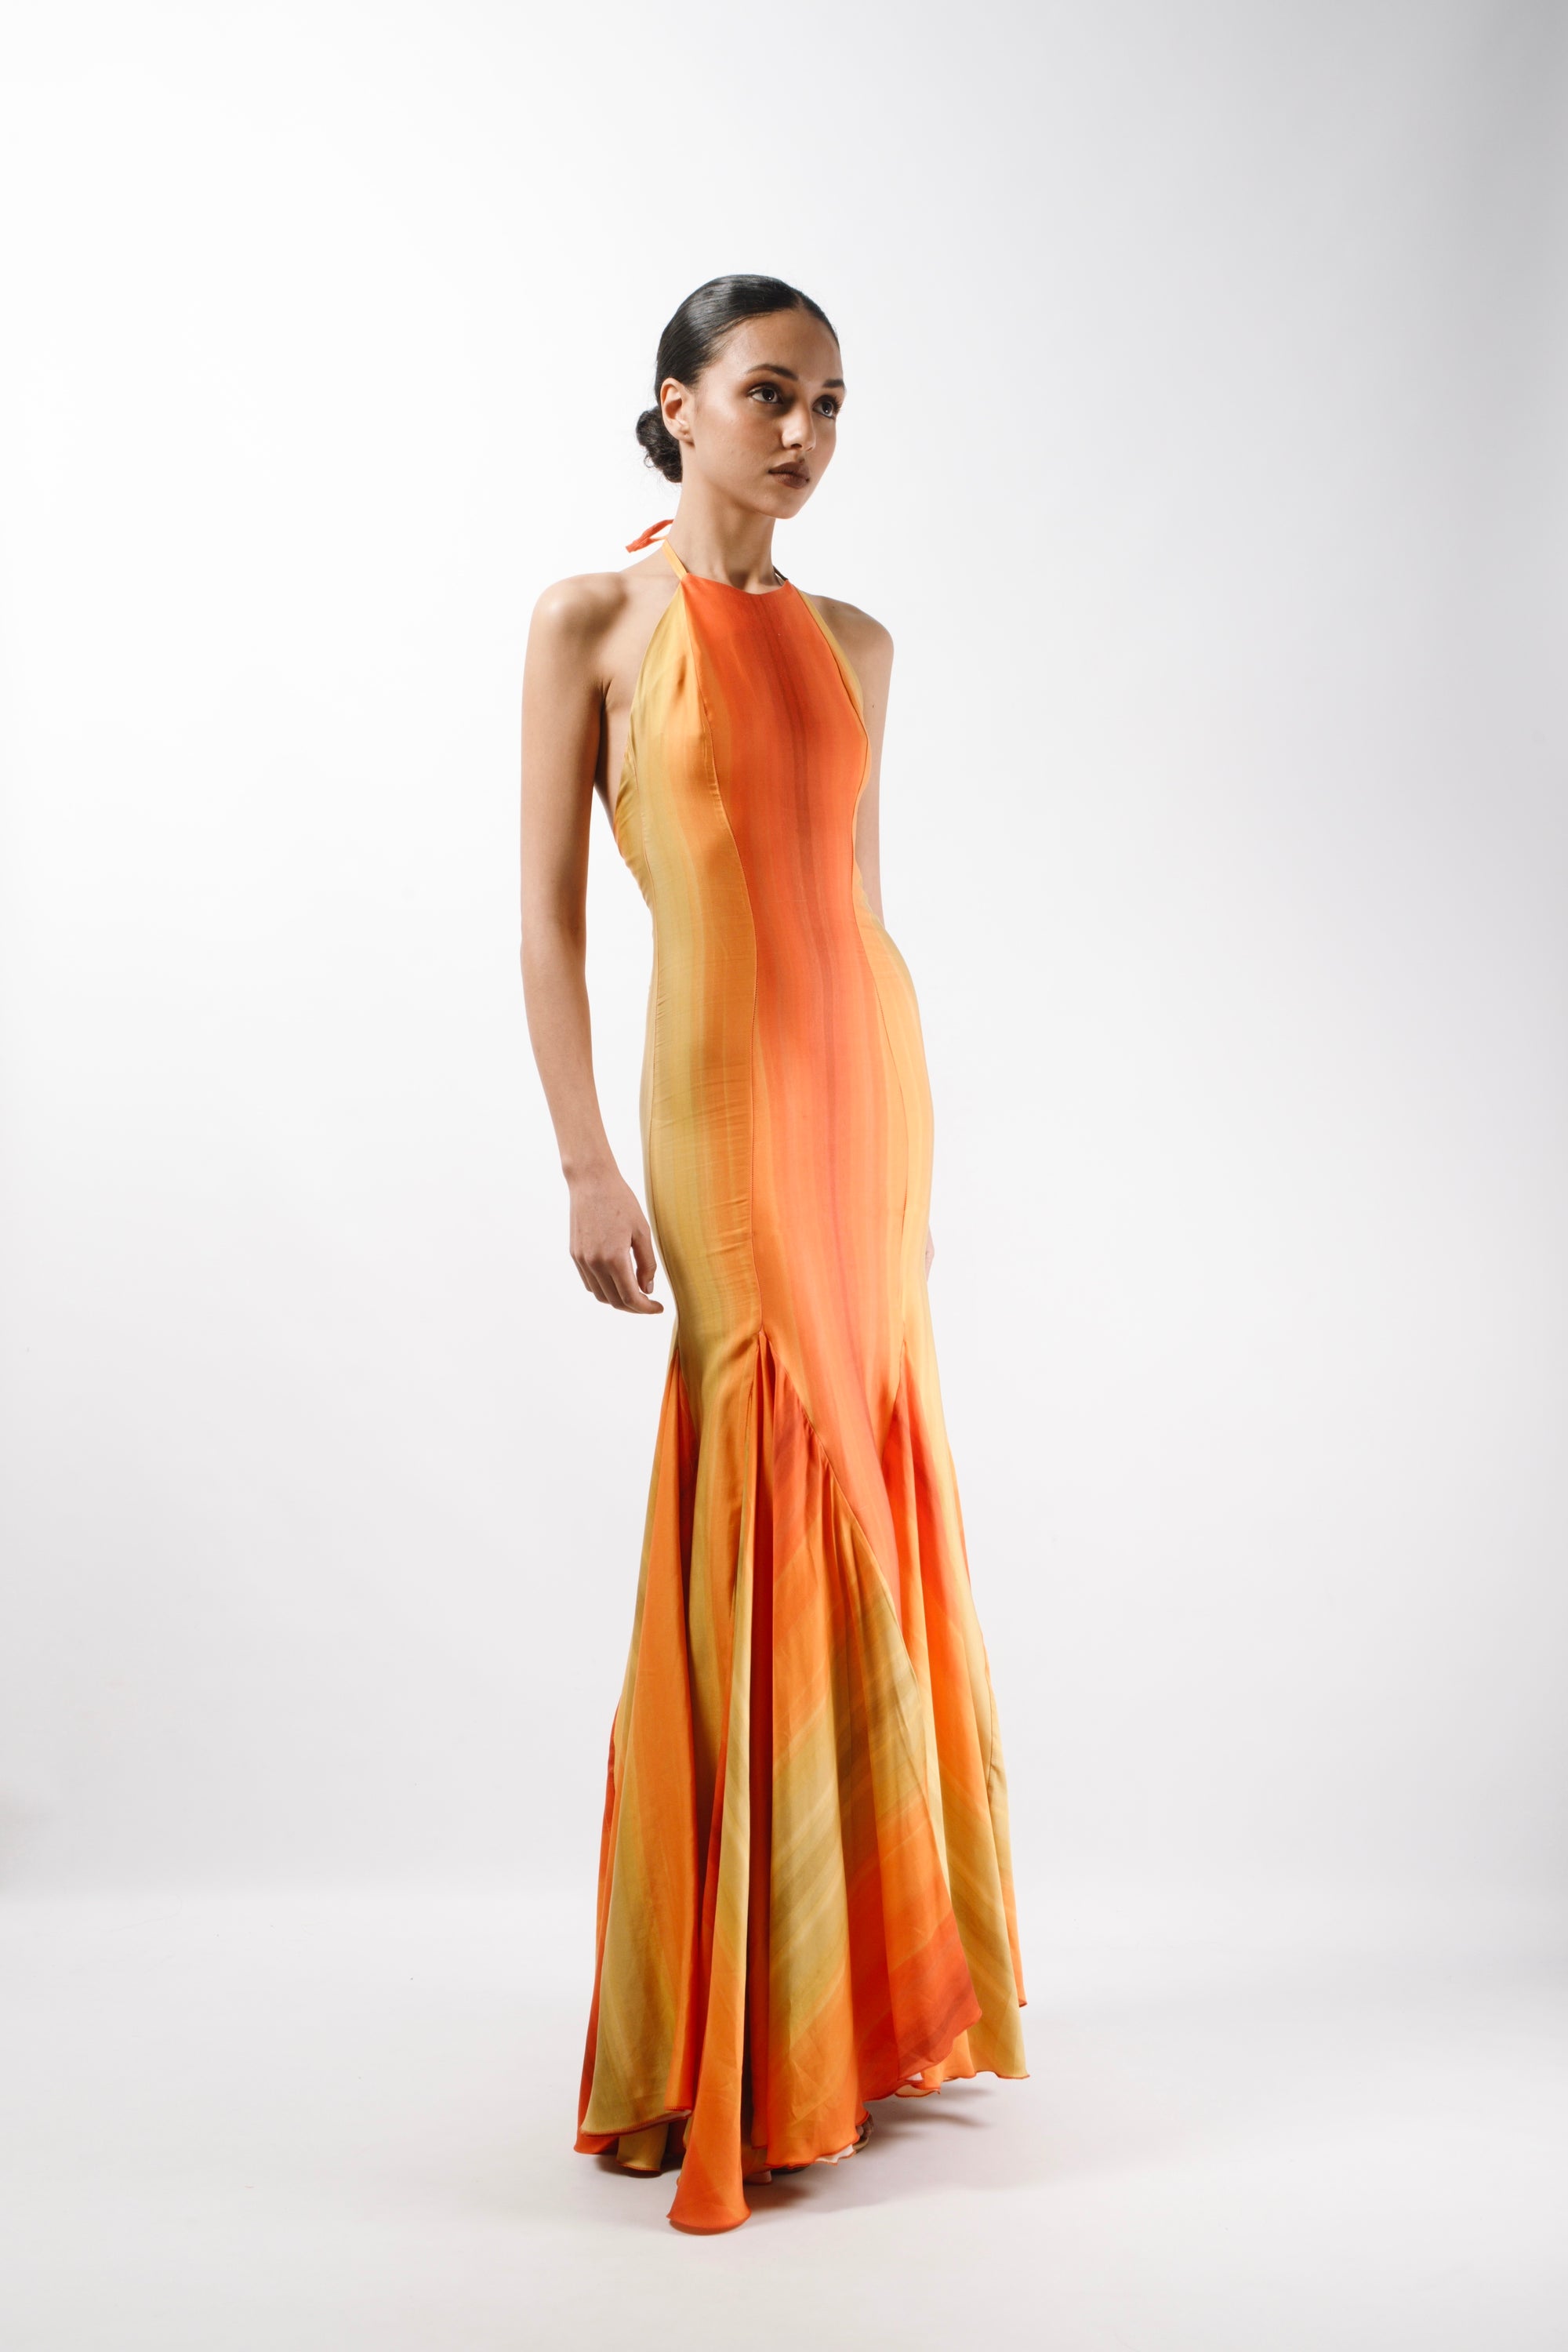 Maxi Gown Dress with long triangle godets and an American neckline with self tie straps. The Dress features an open back - side